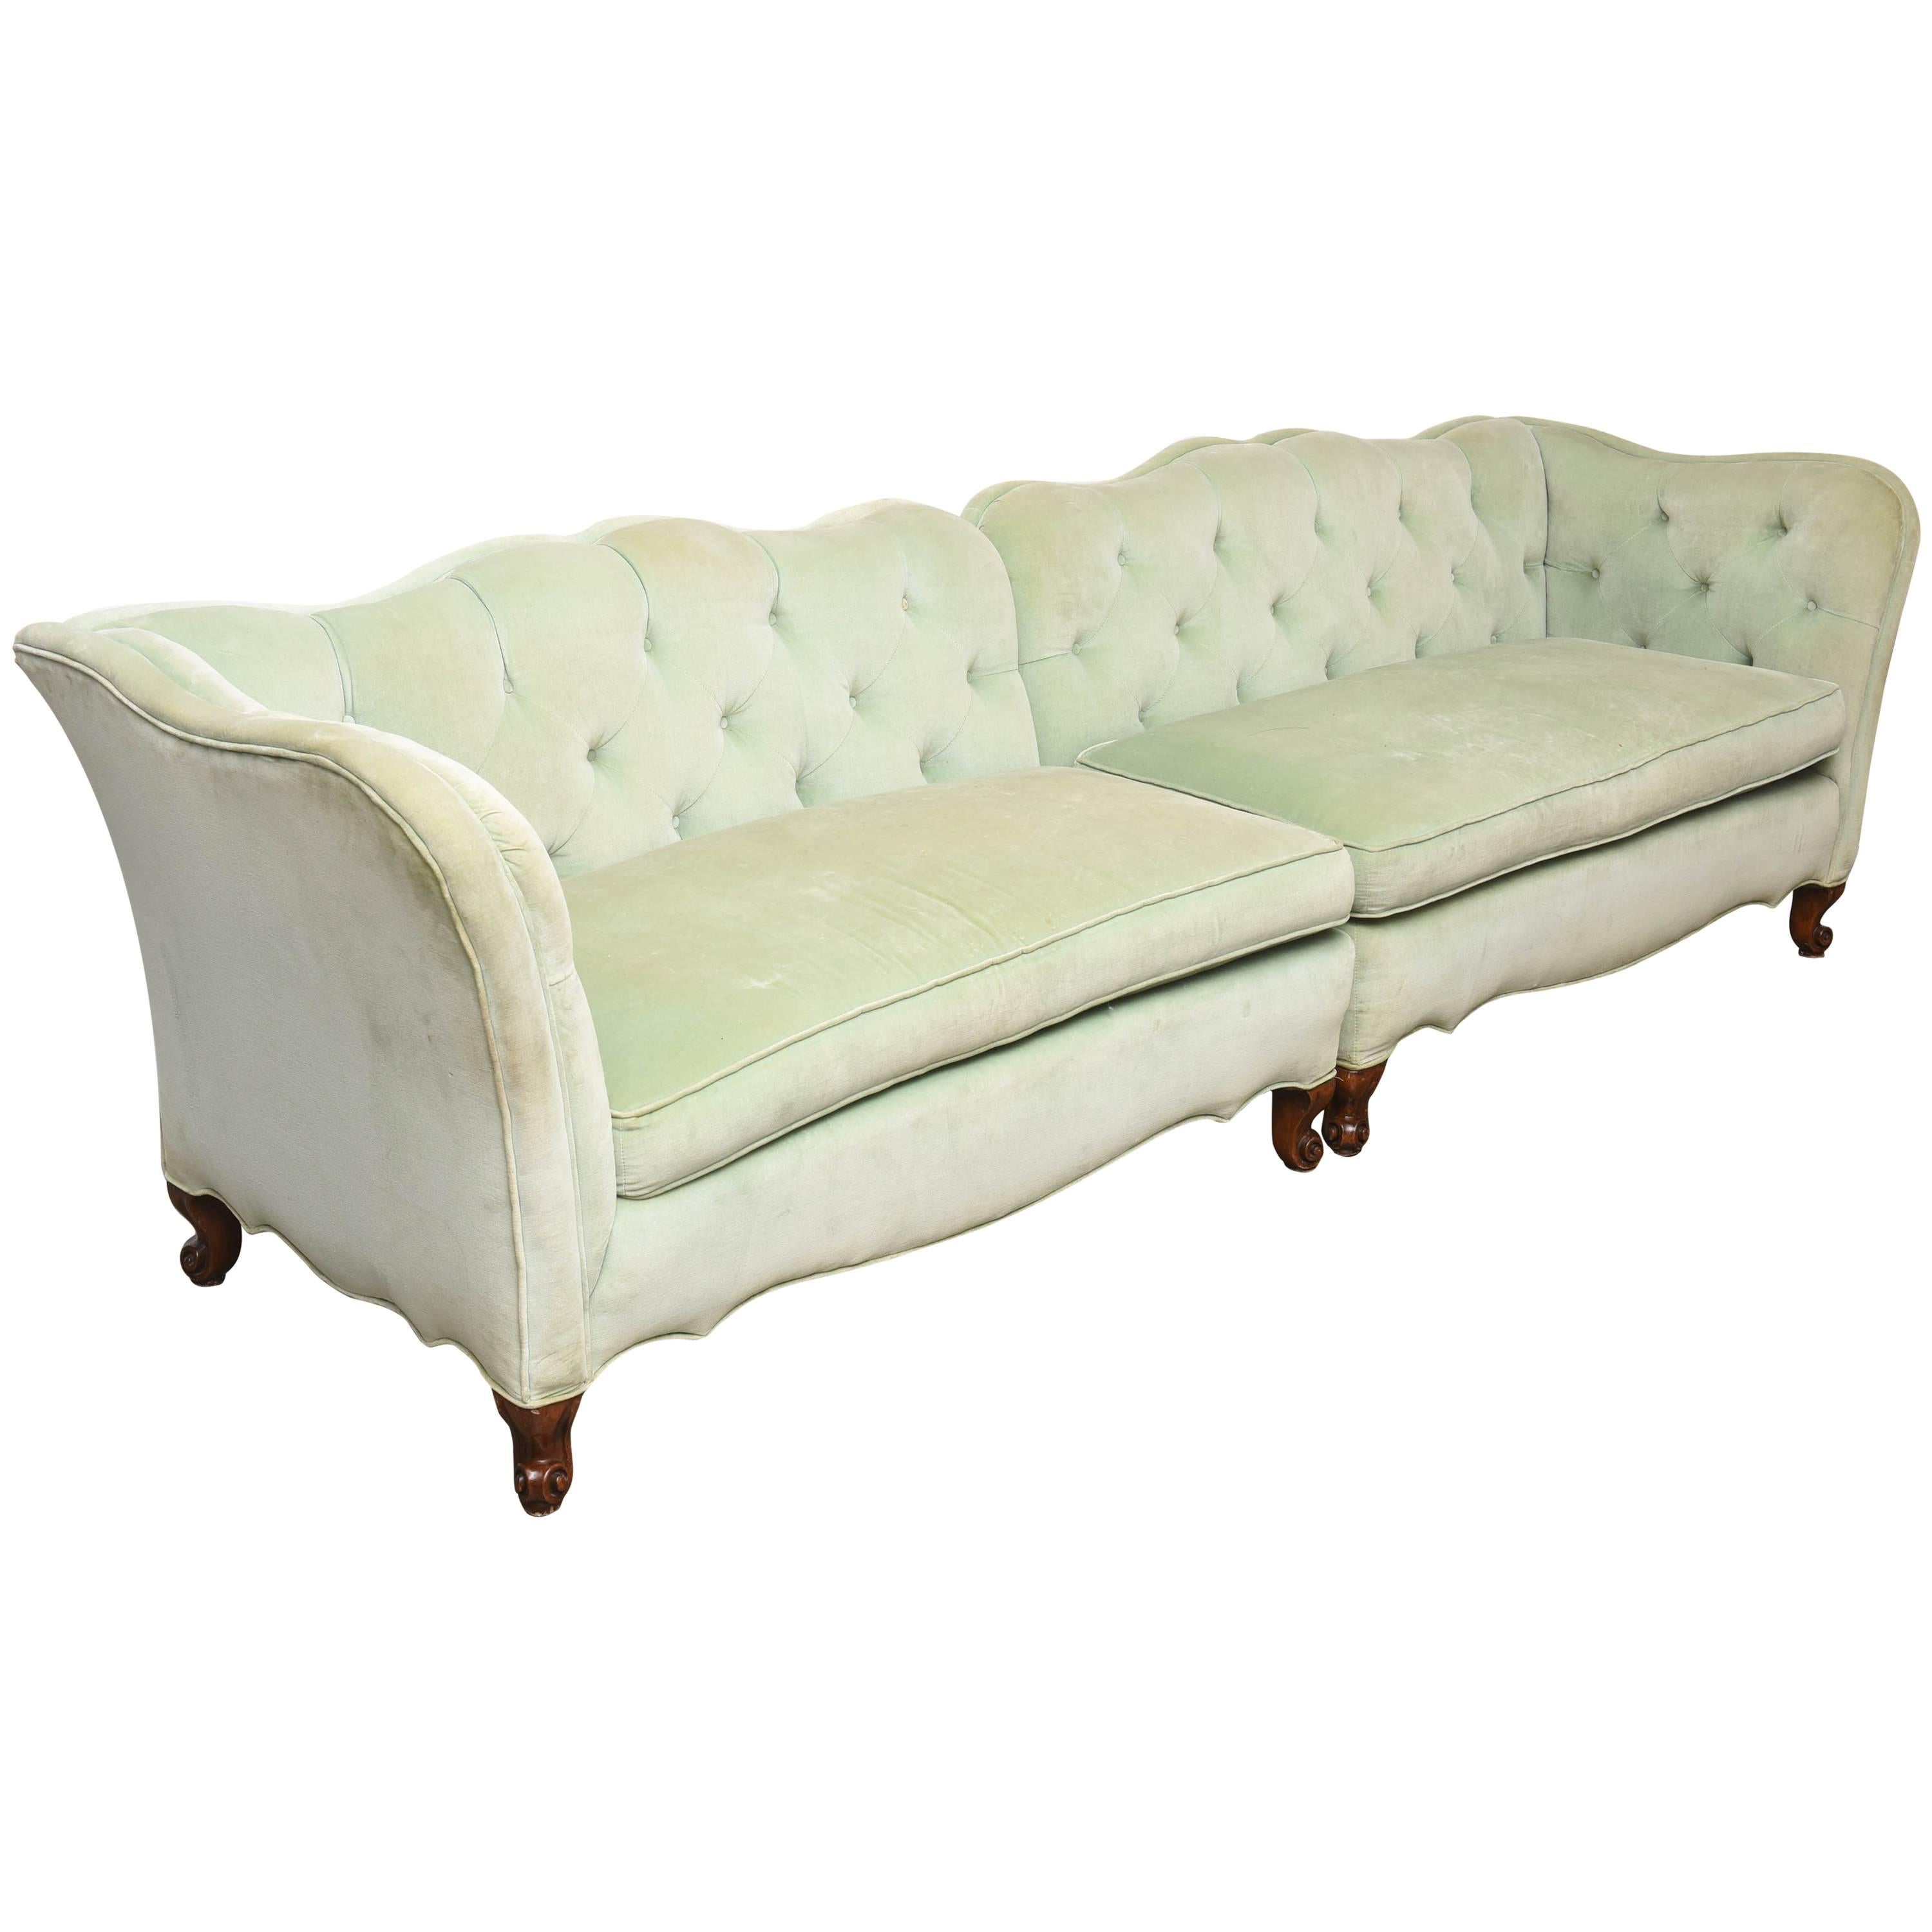 Hollywood Glam 2 Piece Sofa For Sale